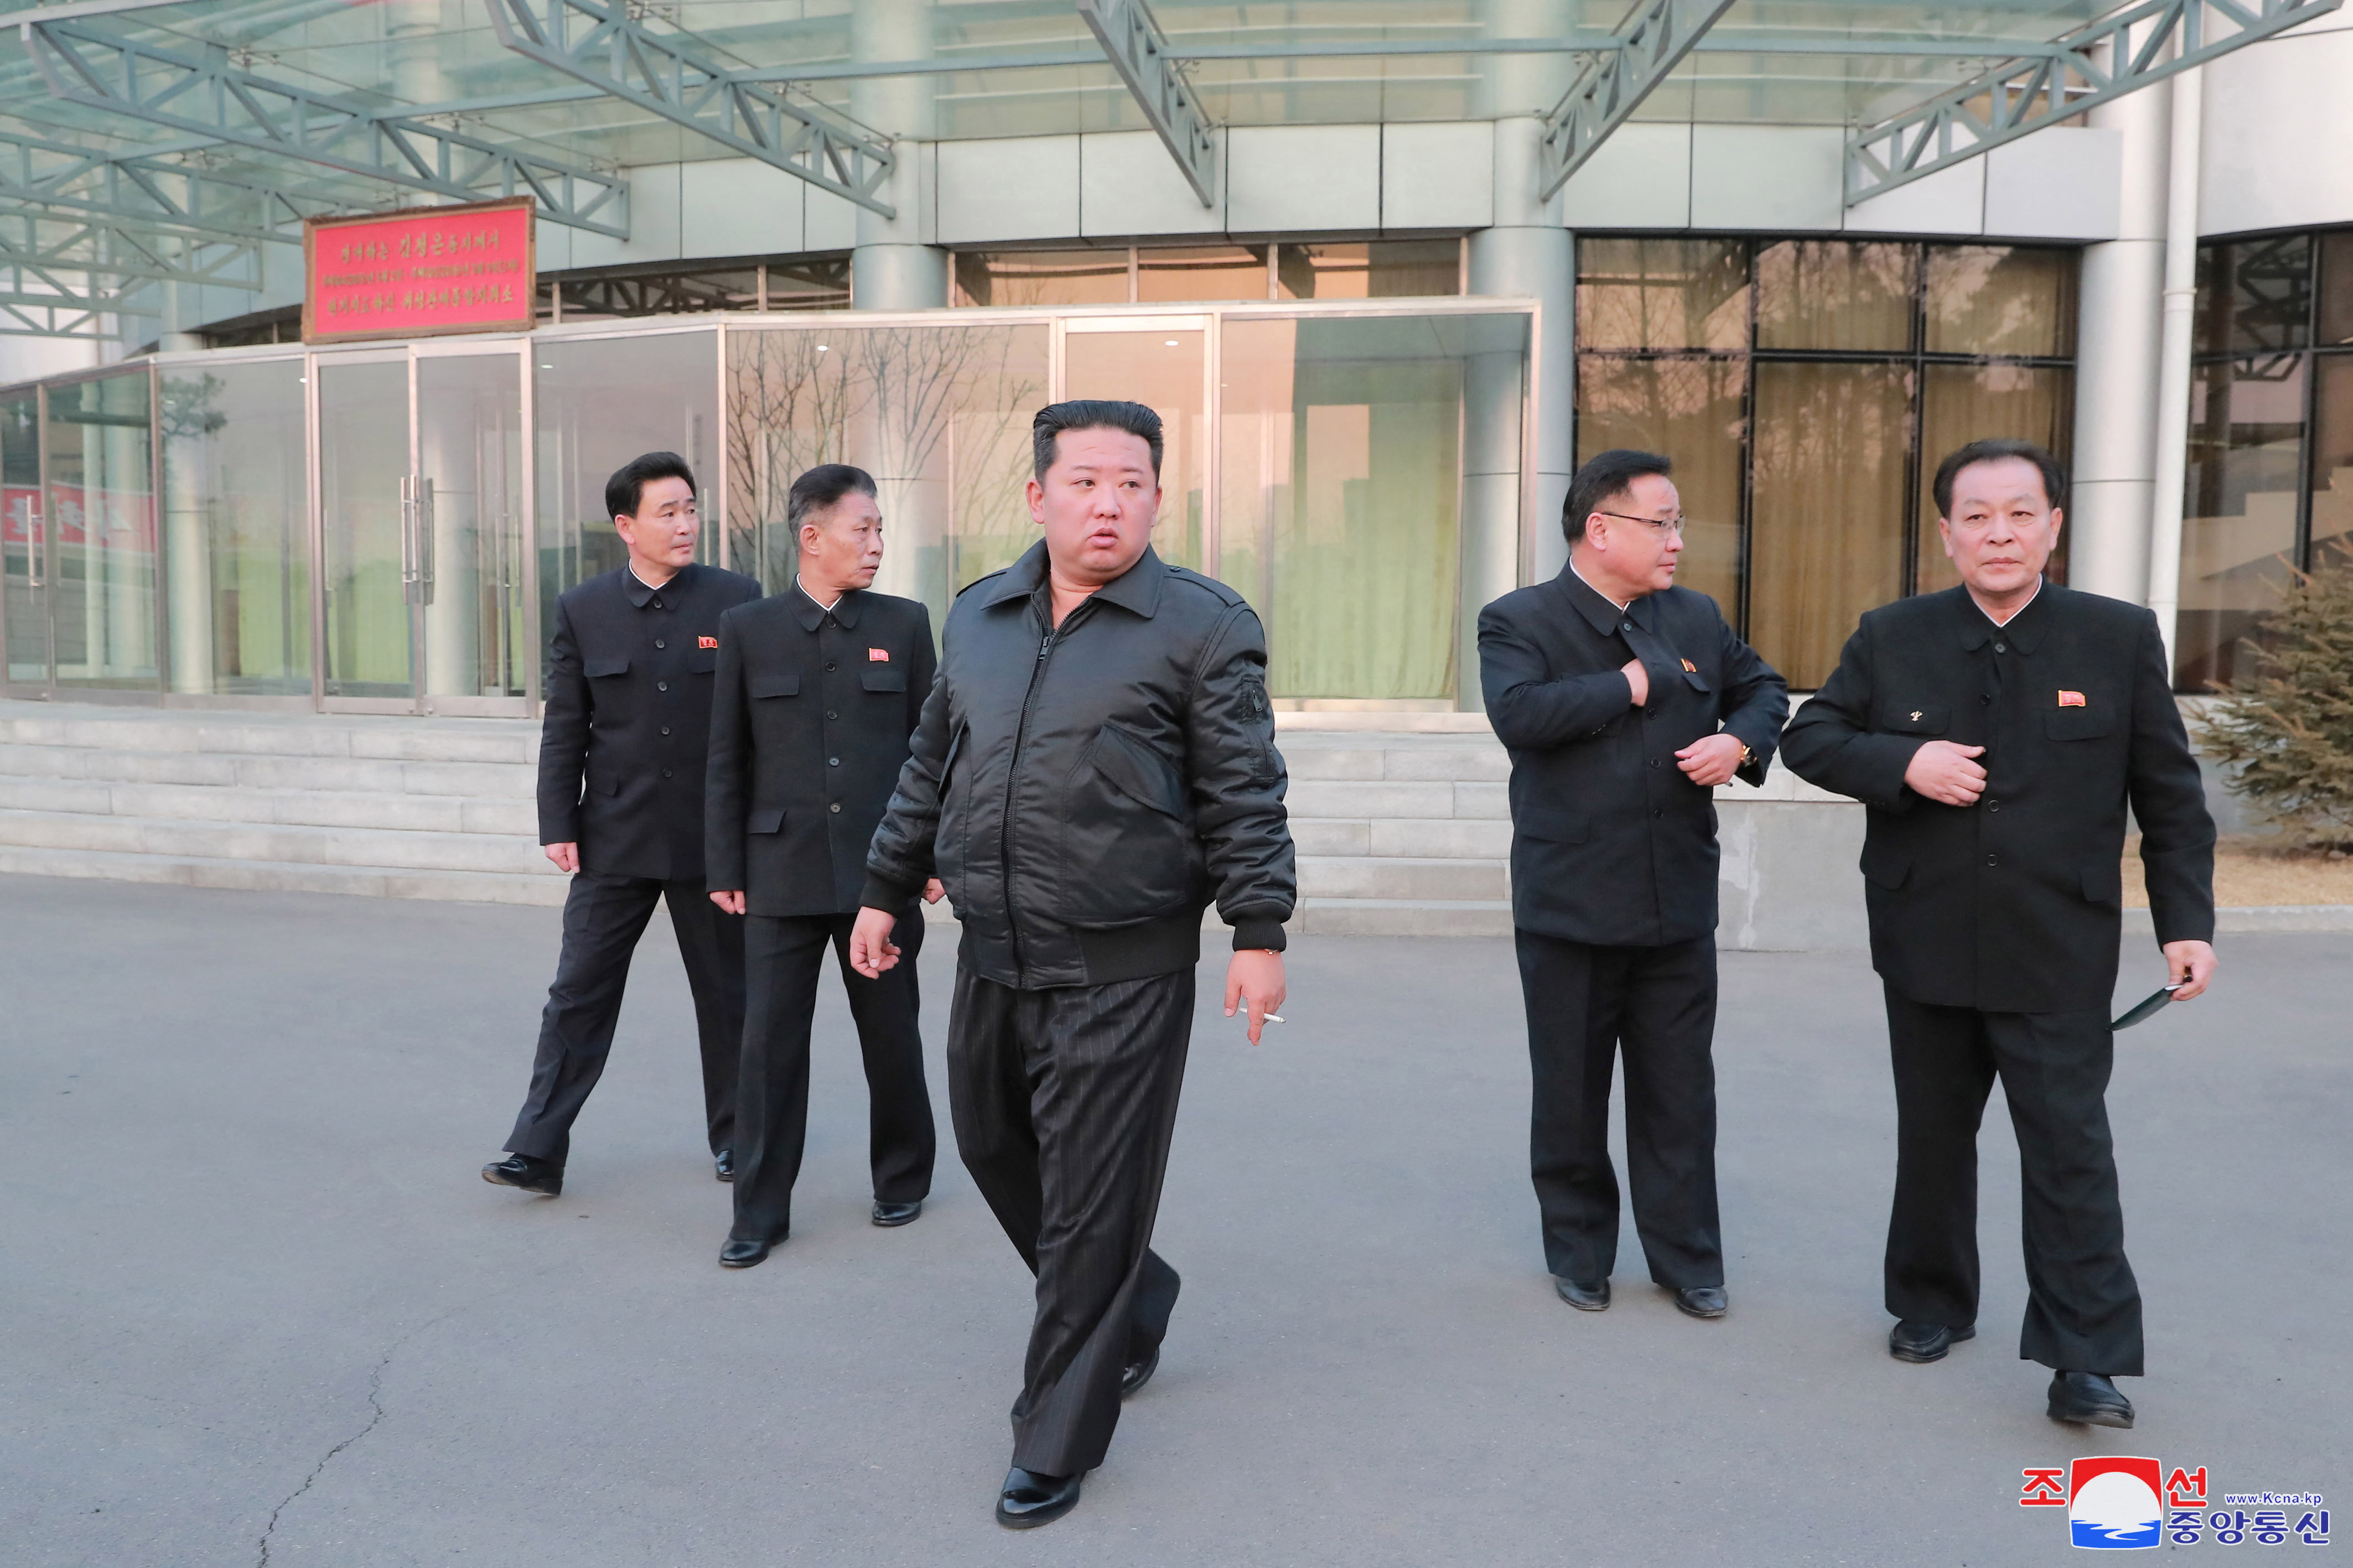 North Korean leader Kim Jong Un inspects North Korea's National Aerospace Development Administration after recent satellite system tests, in Pyongyang